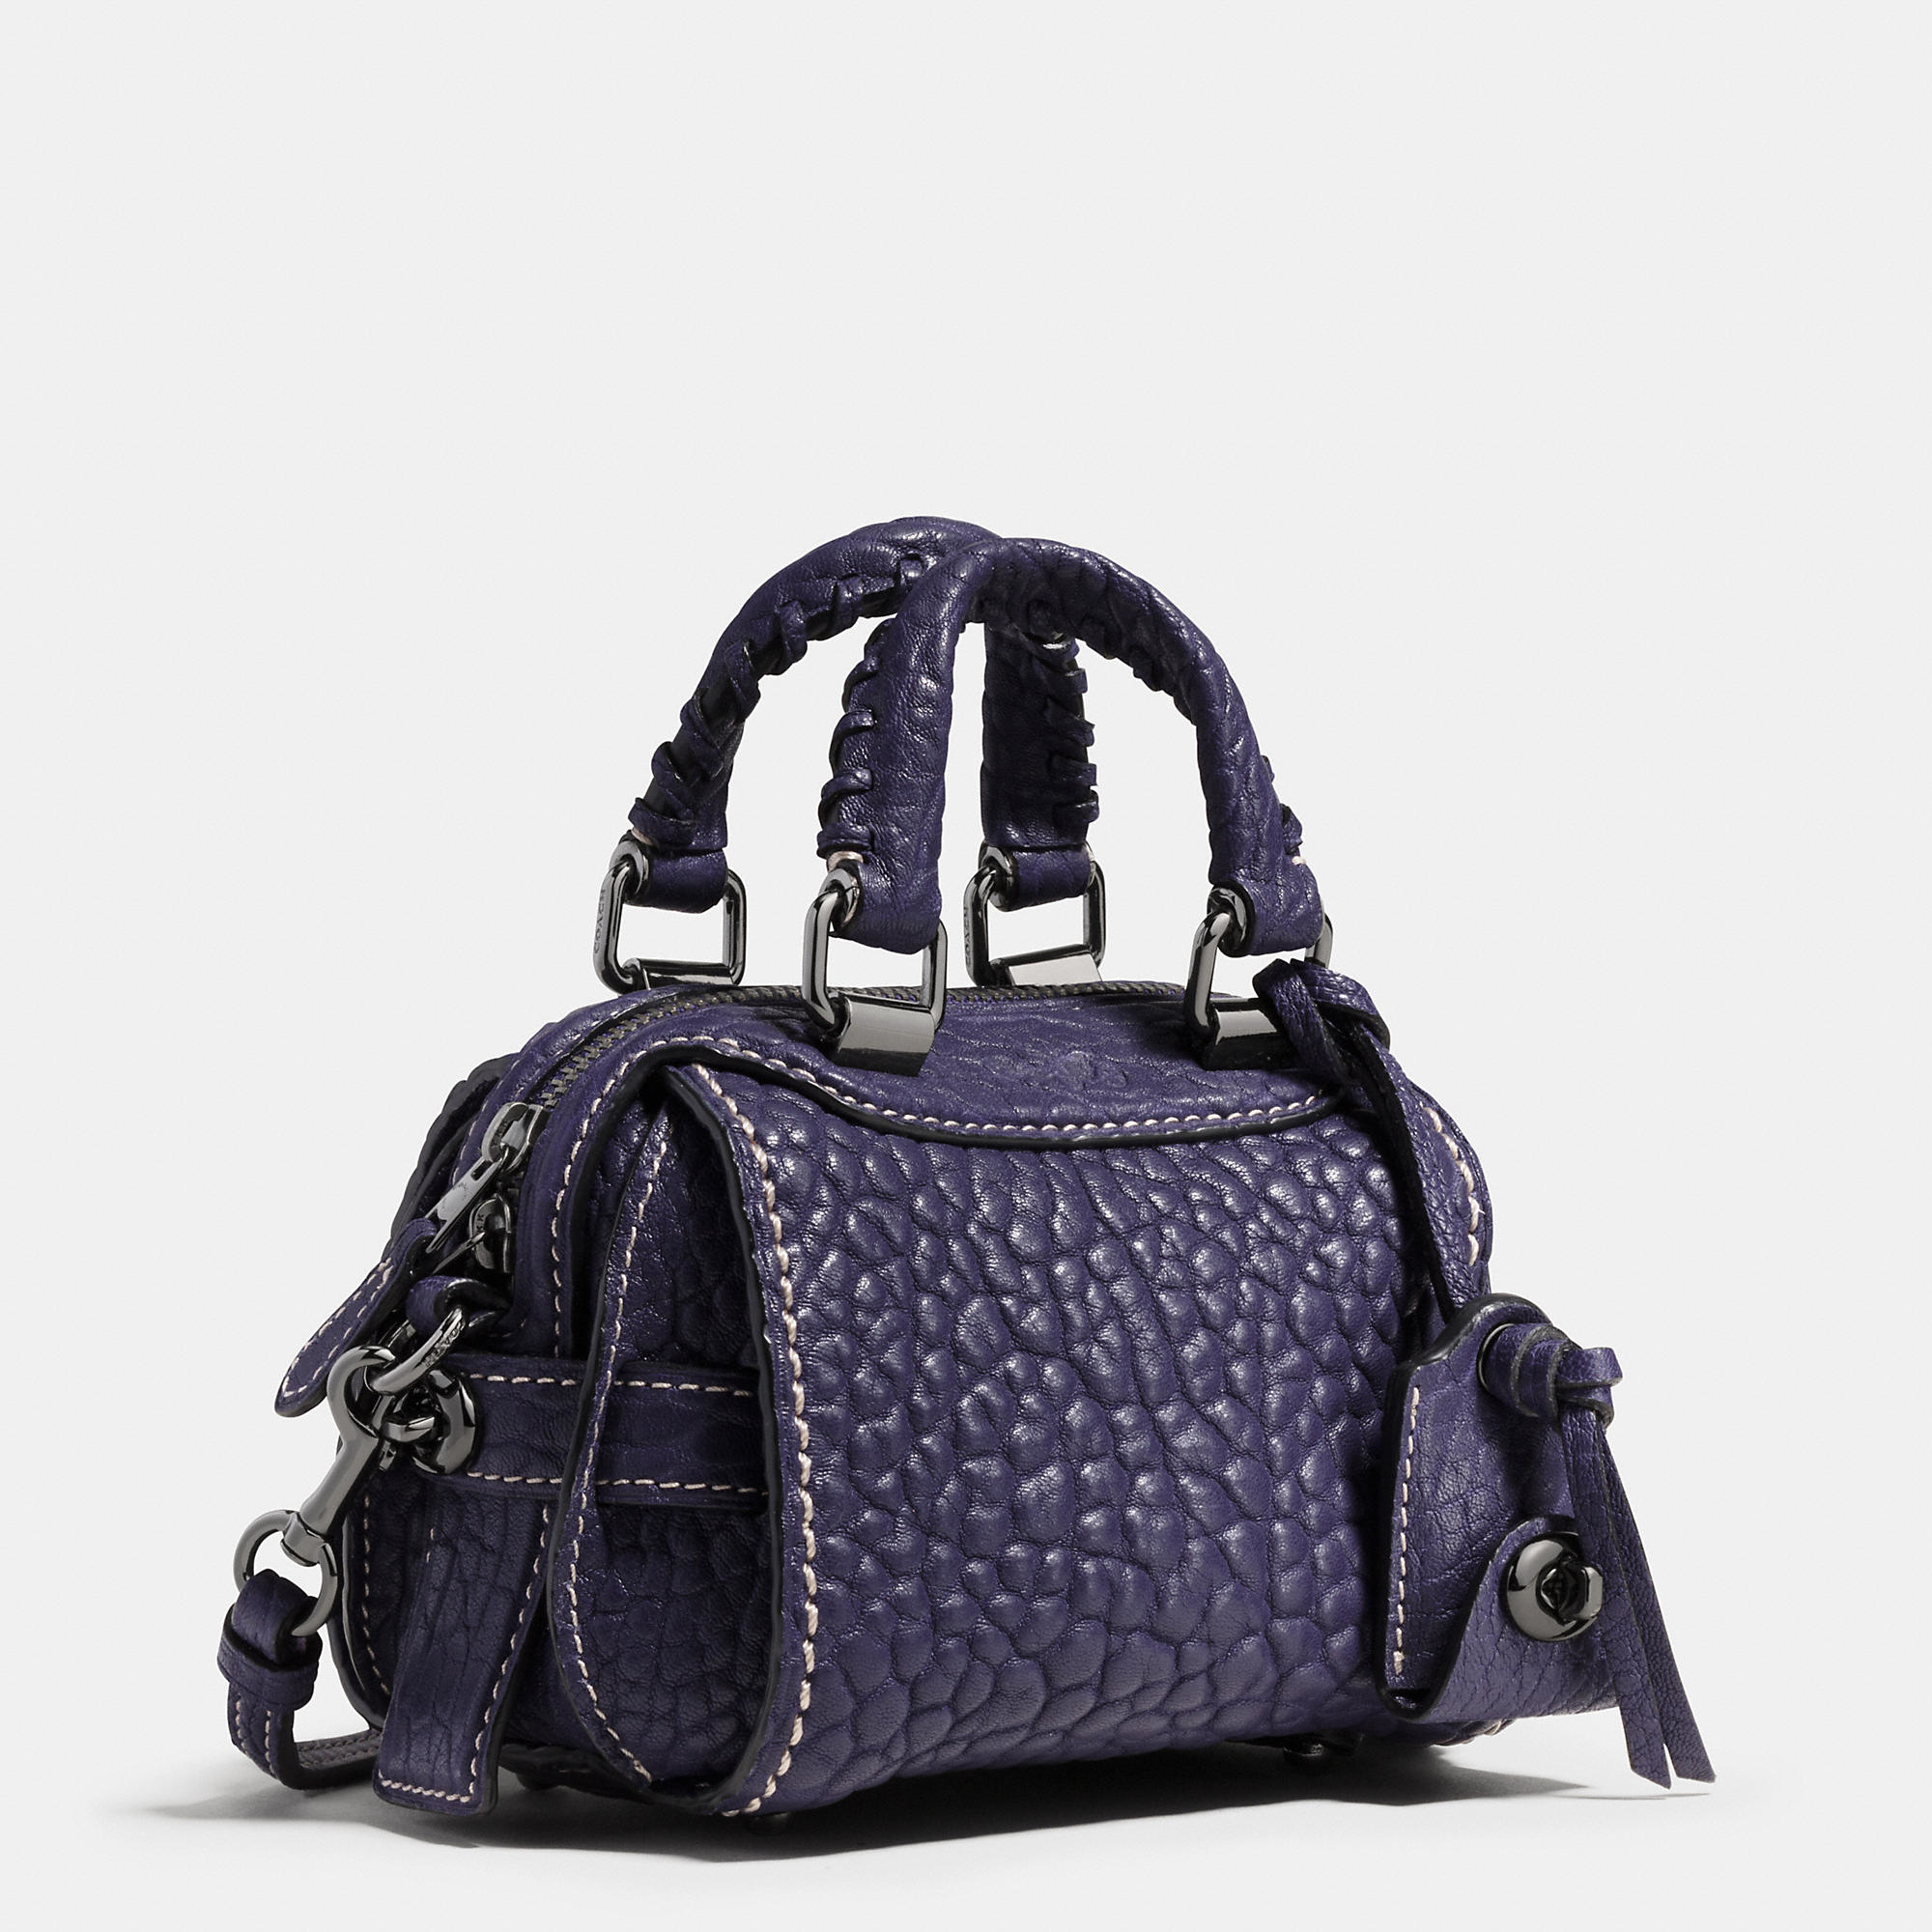 Lyst - Coach Ace Satchel 14 In Glovetanned Nappa Leather in Blue